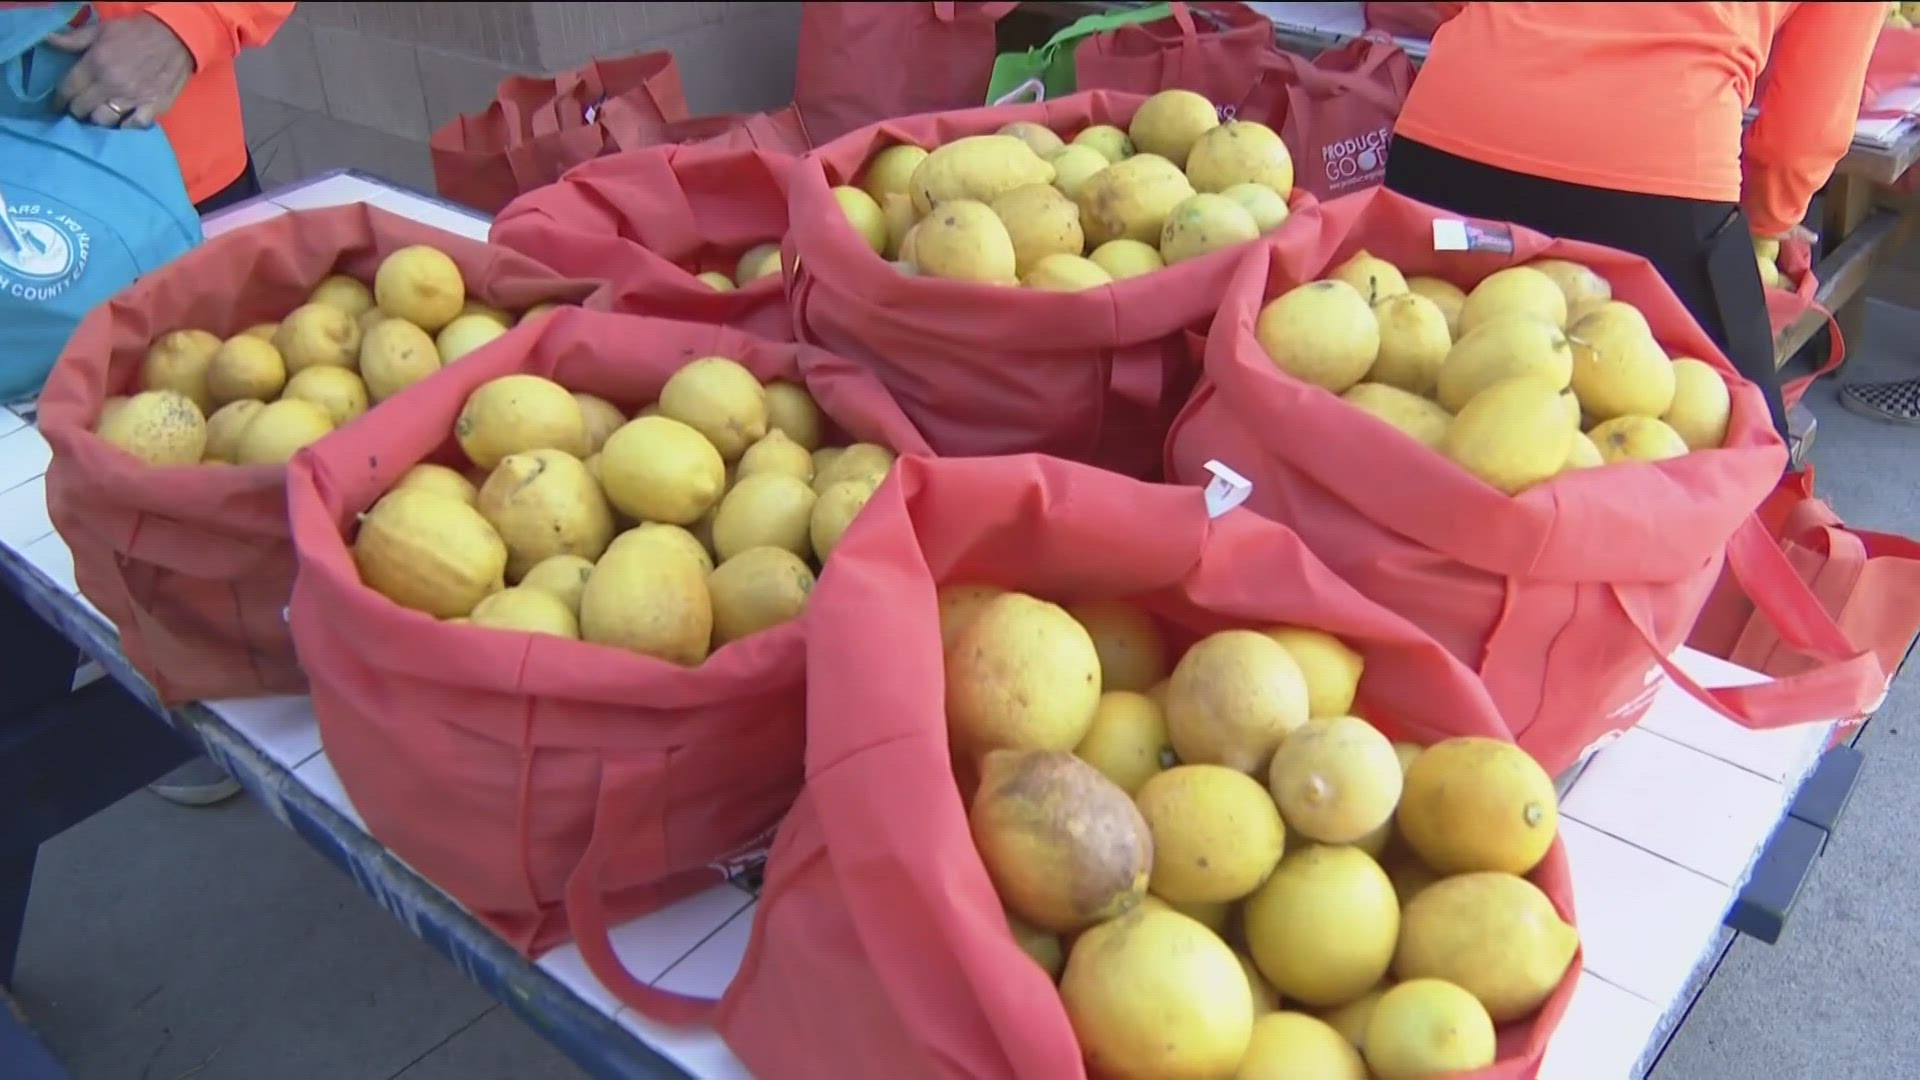 Volunteers 'glean' fruit before it rots and prevents 800 tons of food from going to landfill.